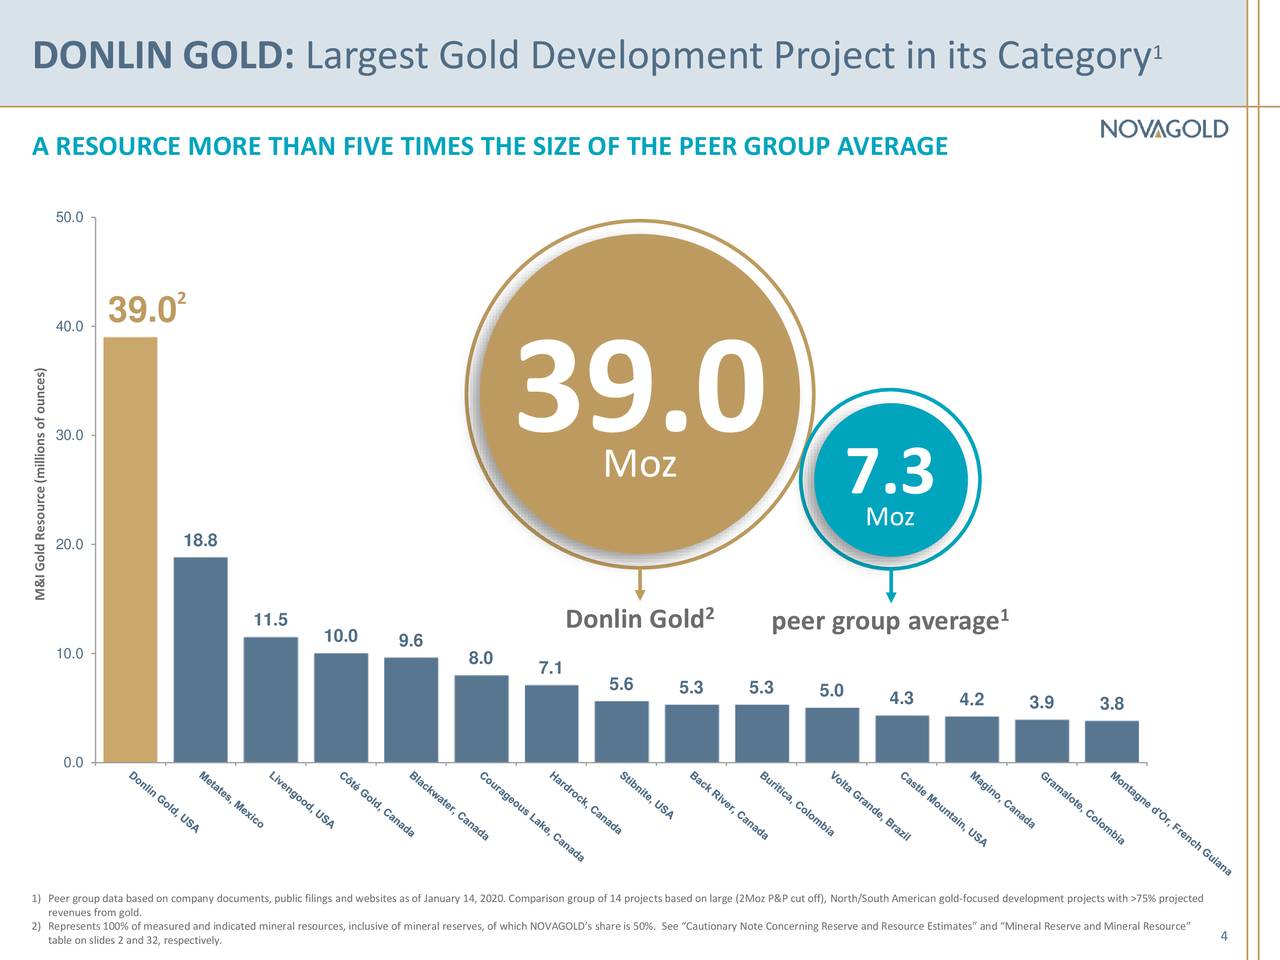 DONLIN GOLD: Largest Gold Development Project in its Category                                           1